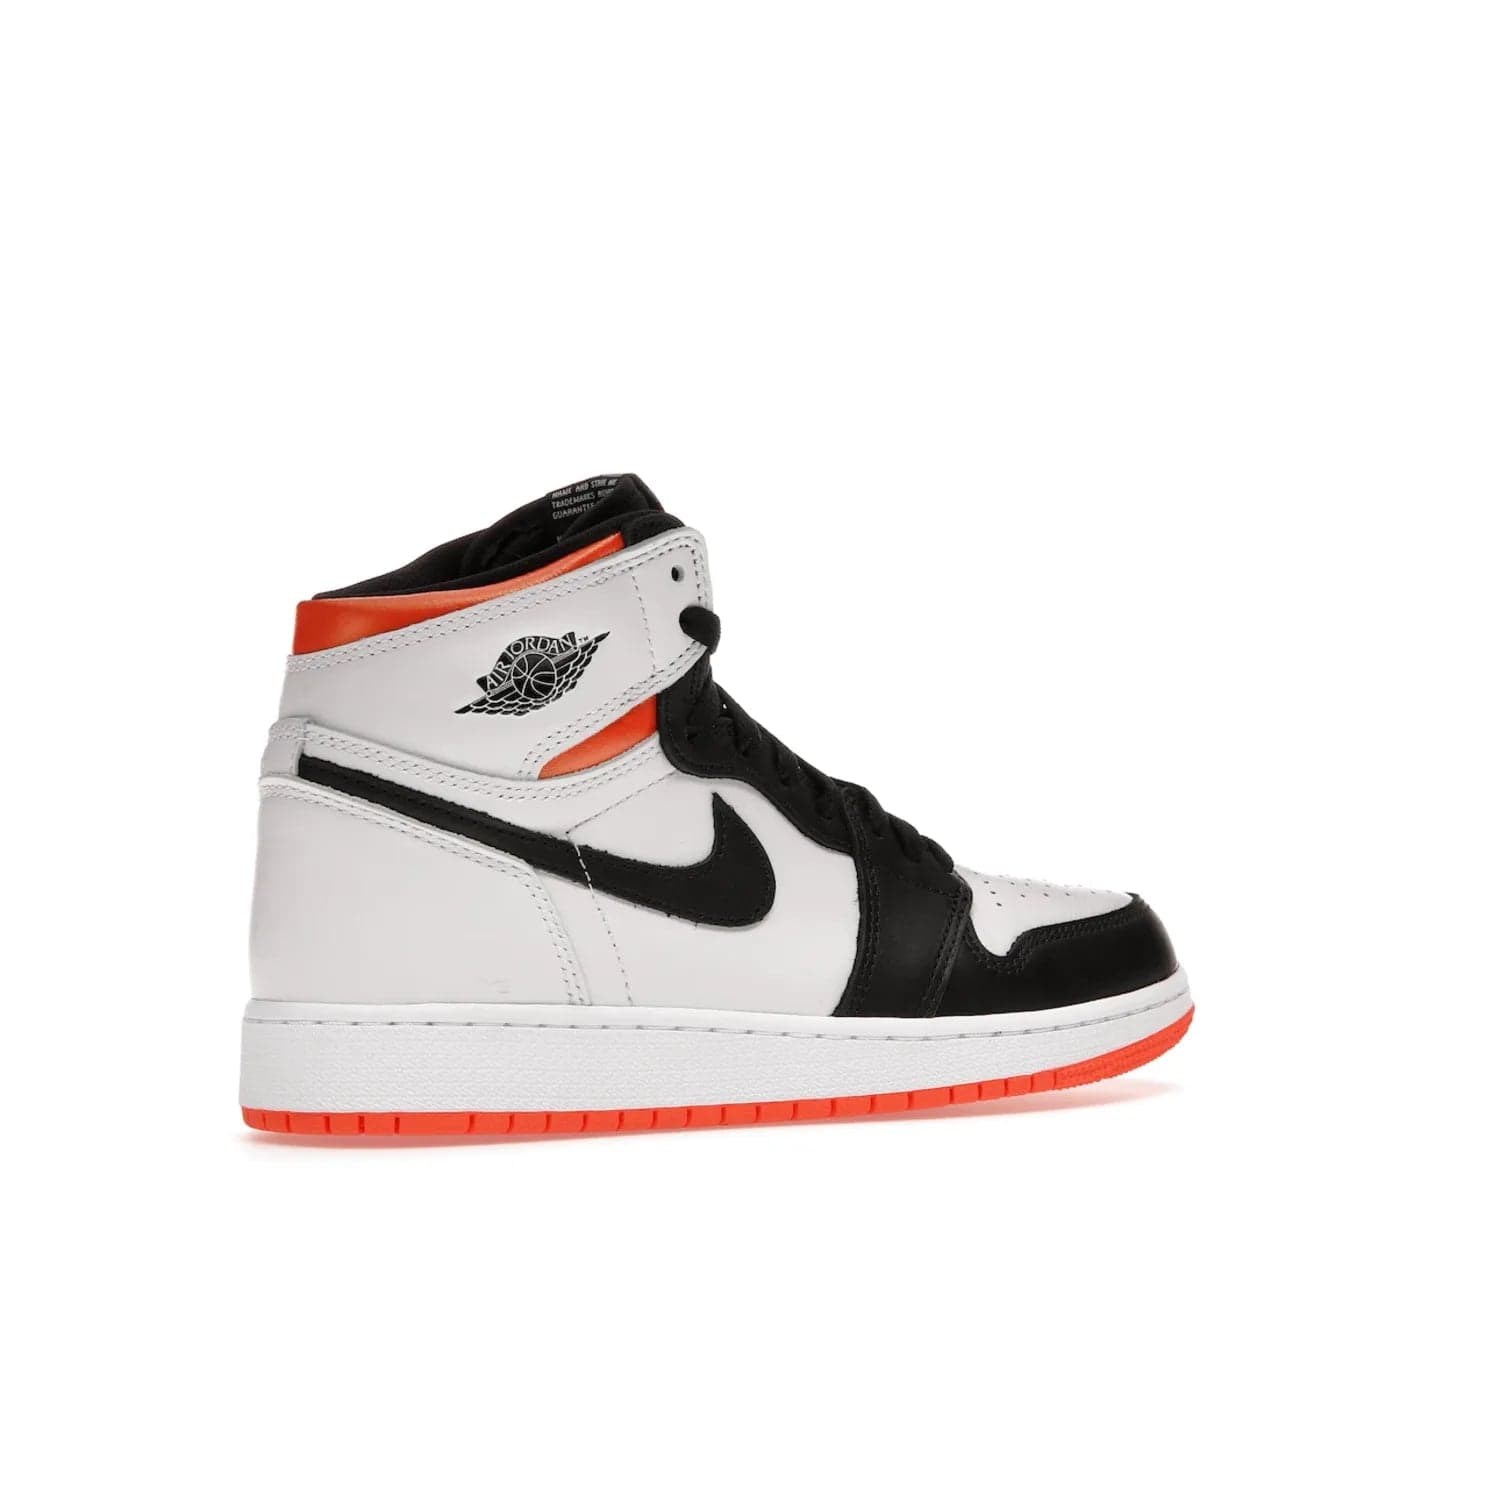 Jordan 1 High OG Electro Orange (GS) - Image 34 - Only at www.BallersClubKickz.com - The Air Jordan 1 High OG Electro Orange GS is the ideal shoe for kids on the go. Featuring white leather uppers, black overlays, and bright orange accents, it's sure to become a favorite. A great mix of classic style and vibrant colors, the shoe delivers air cushioning for comfort and hard orange rubber for grip. Release on July 17th, 2021. Get them a pair today.